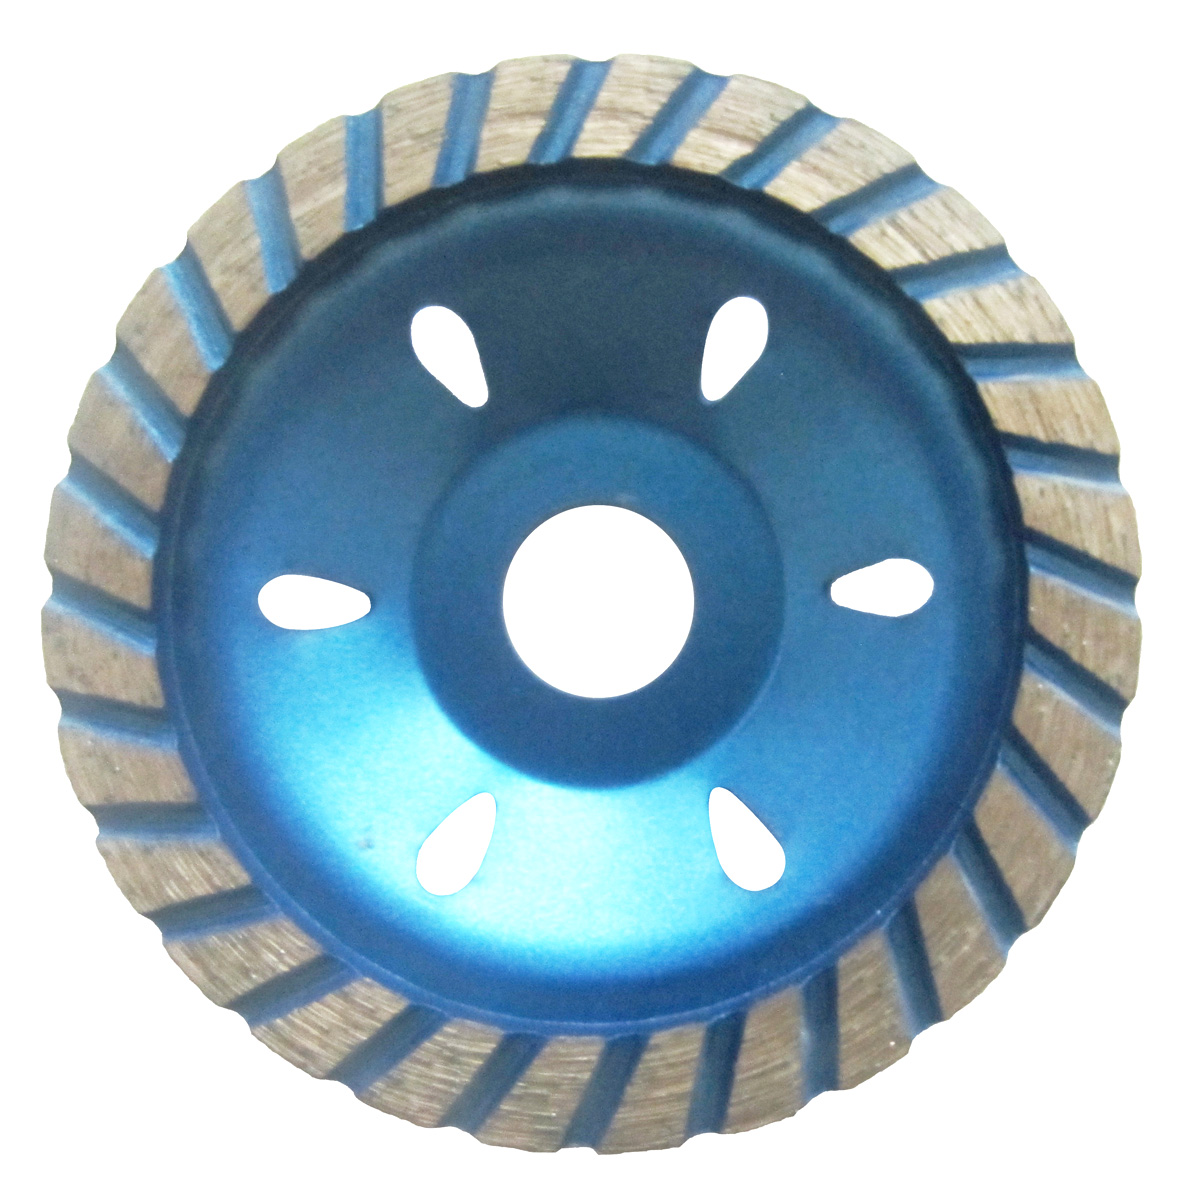 Aggressive Coating Removal Turbo Segments Diamond Grinding Cup Wheel For Concrete Grinder